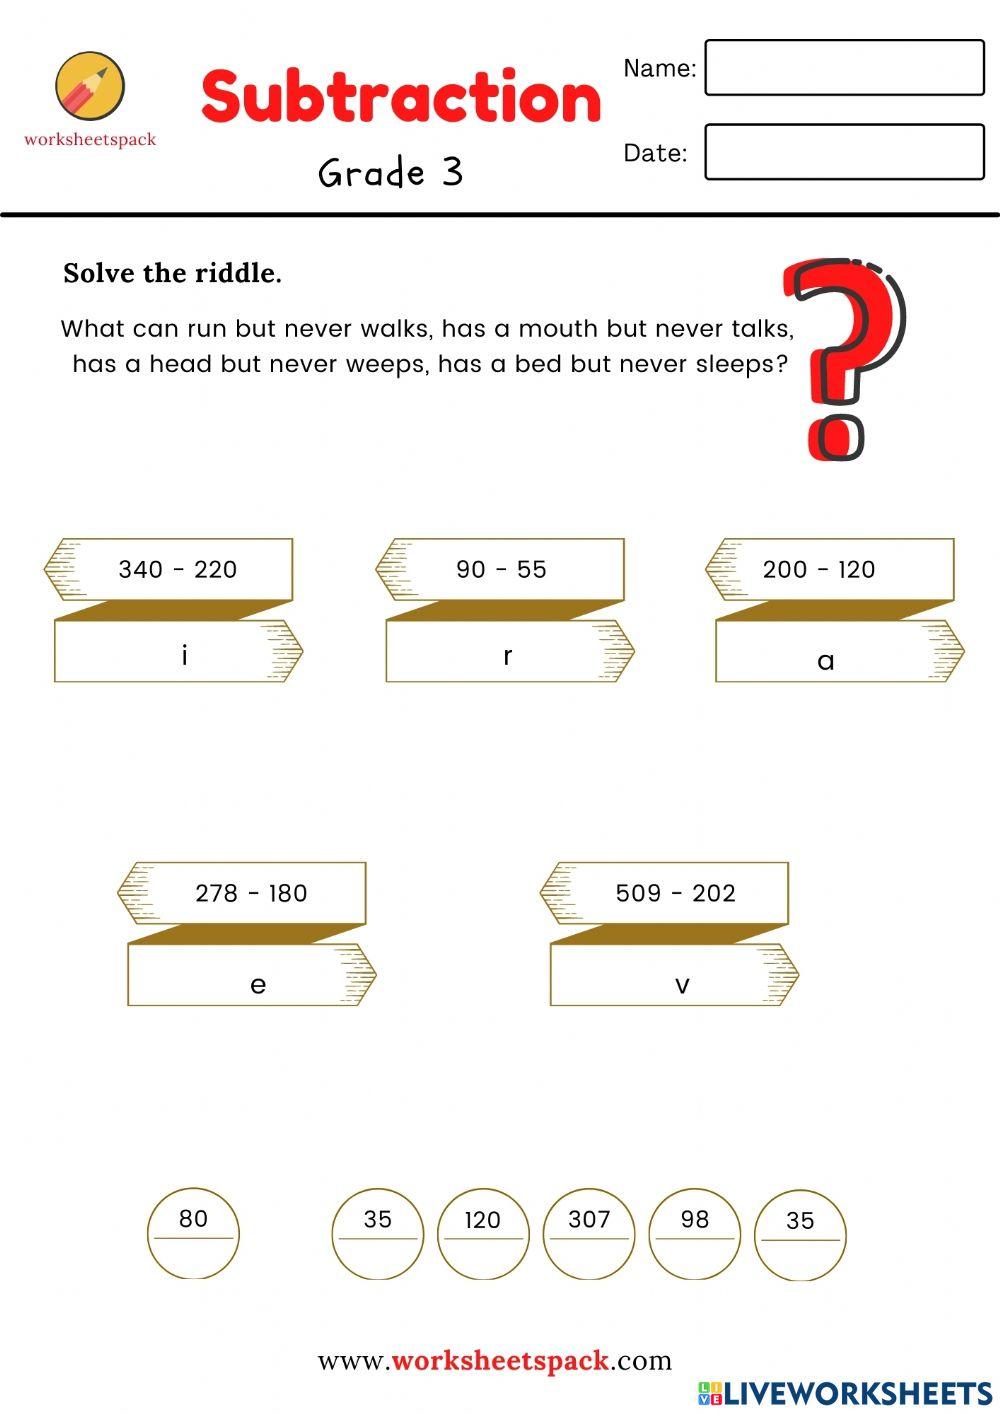 Subtraction solve the riddle